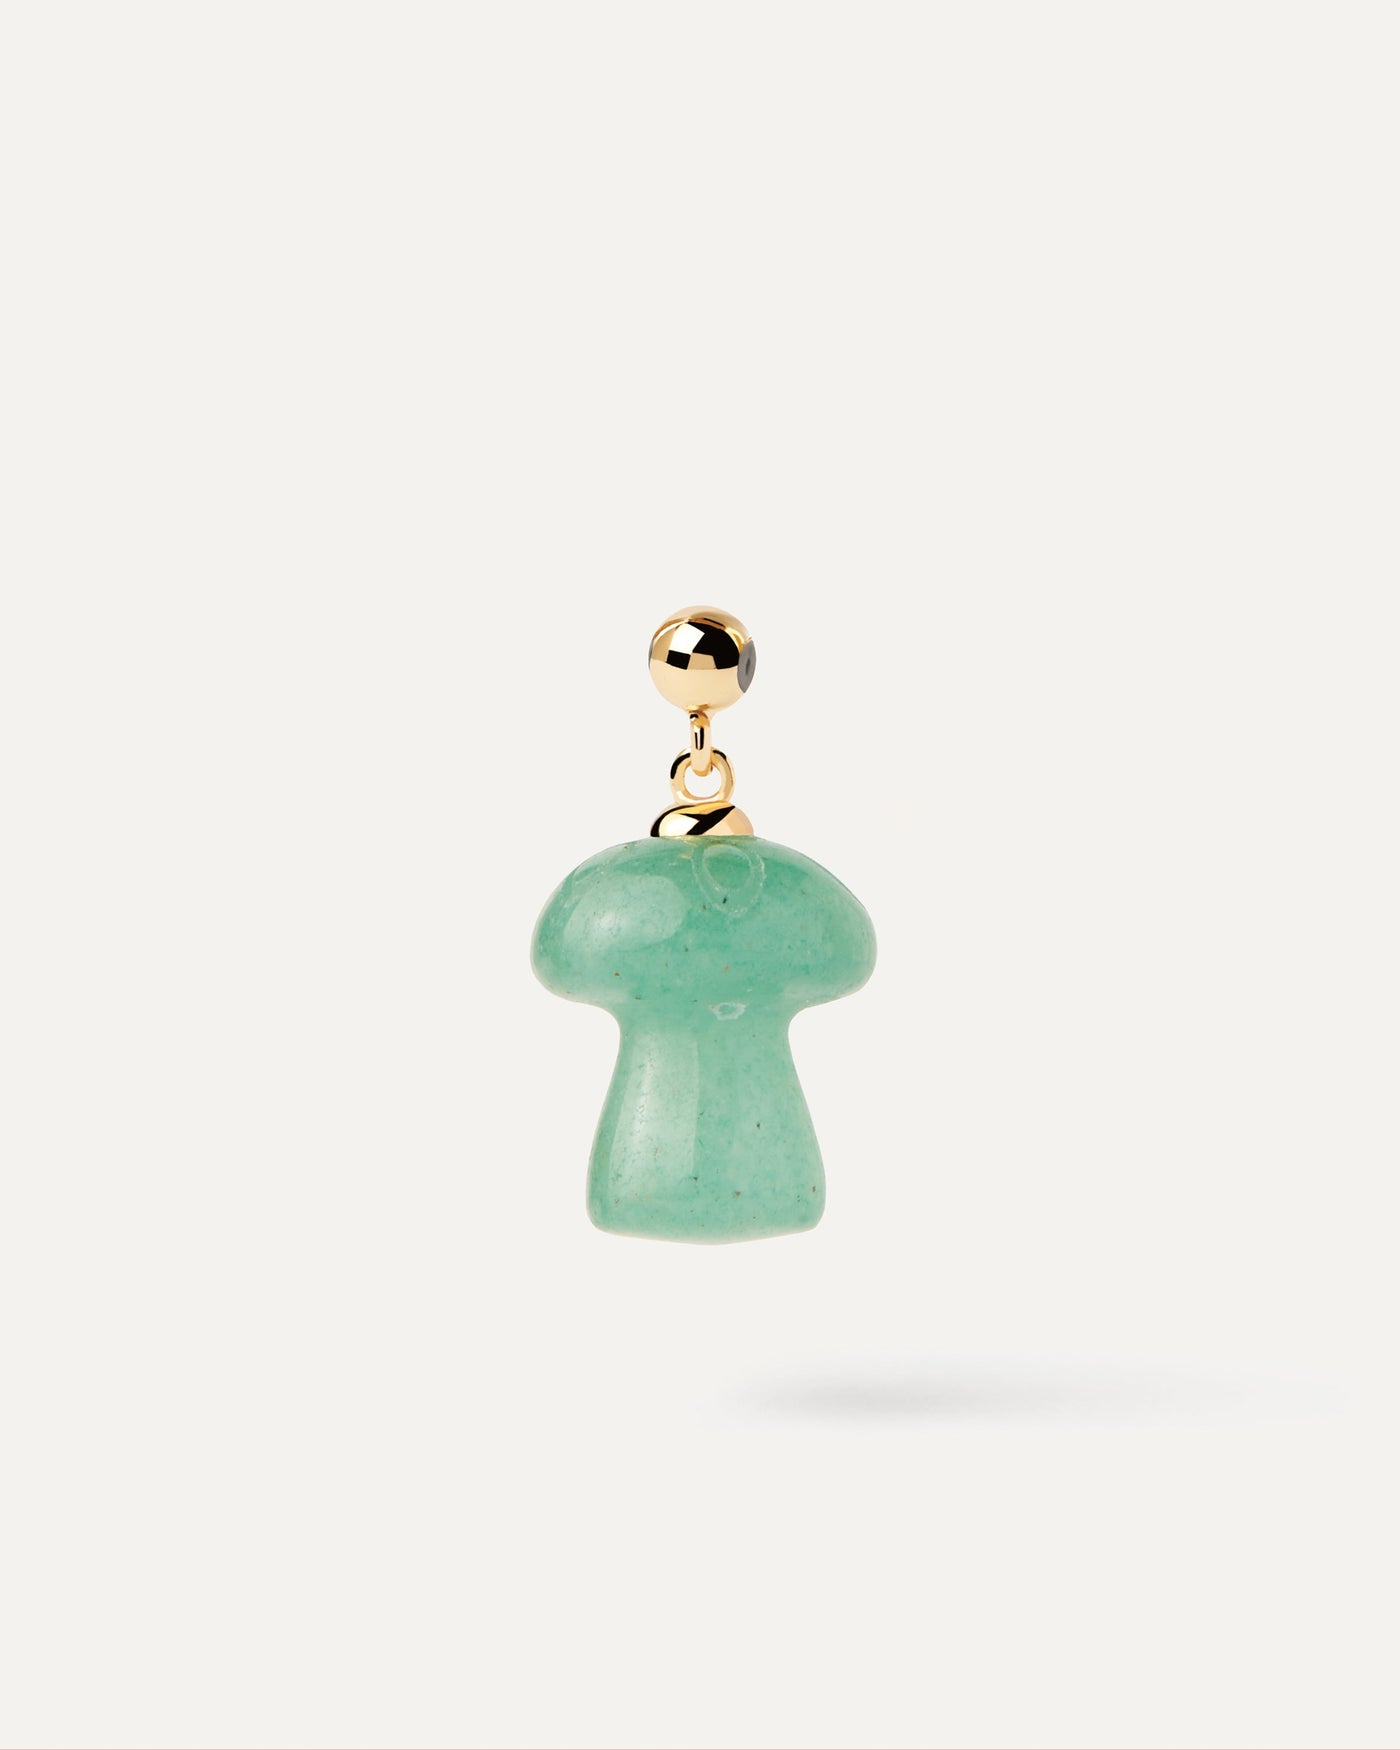 2023 Selection | Green Aventurine Mushroom Charm . Get the latest arrival from PDPAOLA. Place your order safely and get this Best Seller. Free Shipping.